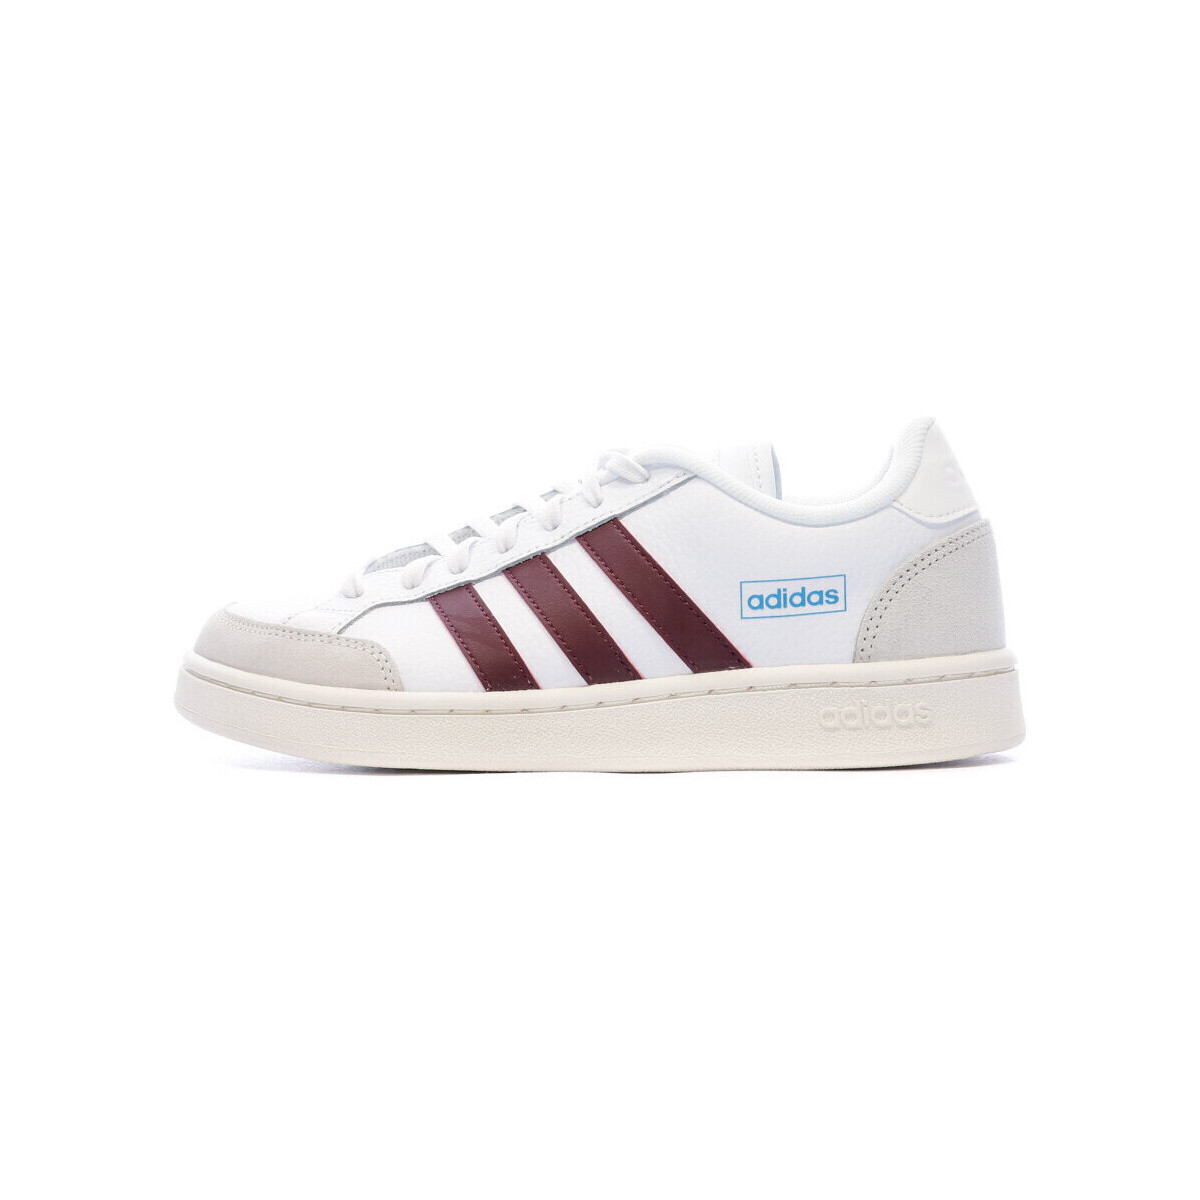 Chaussures Homme Baskets basses adidas Originals GY3602 Blanc